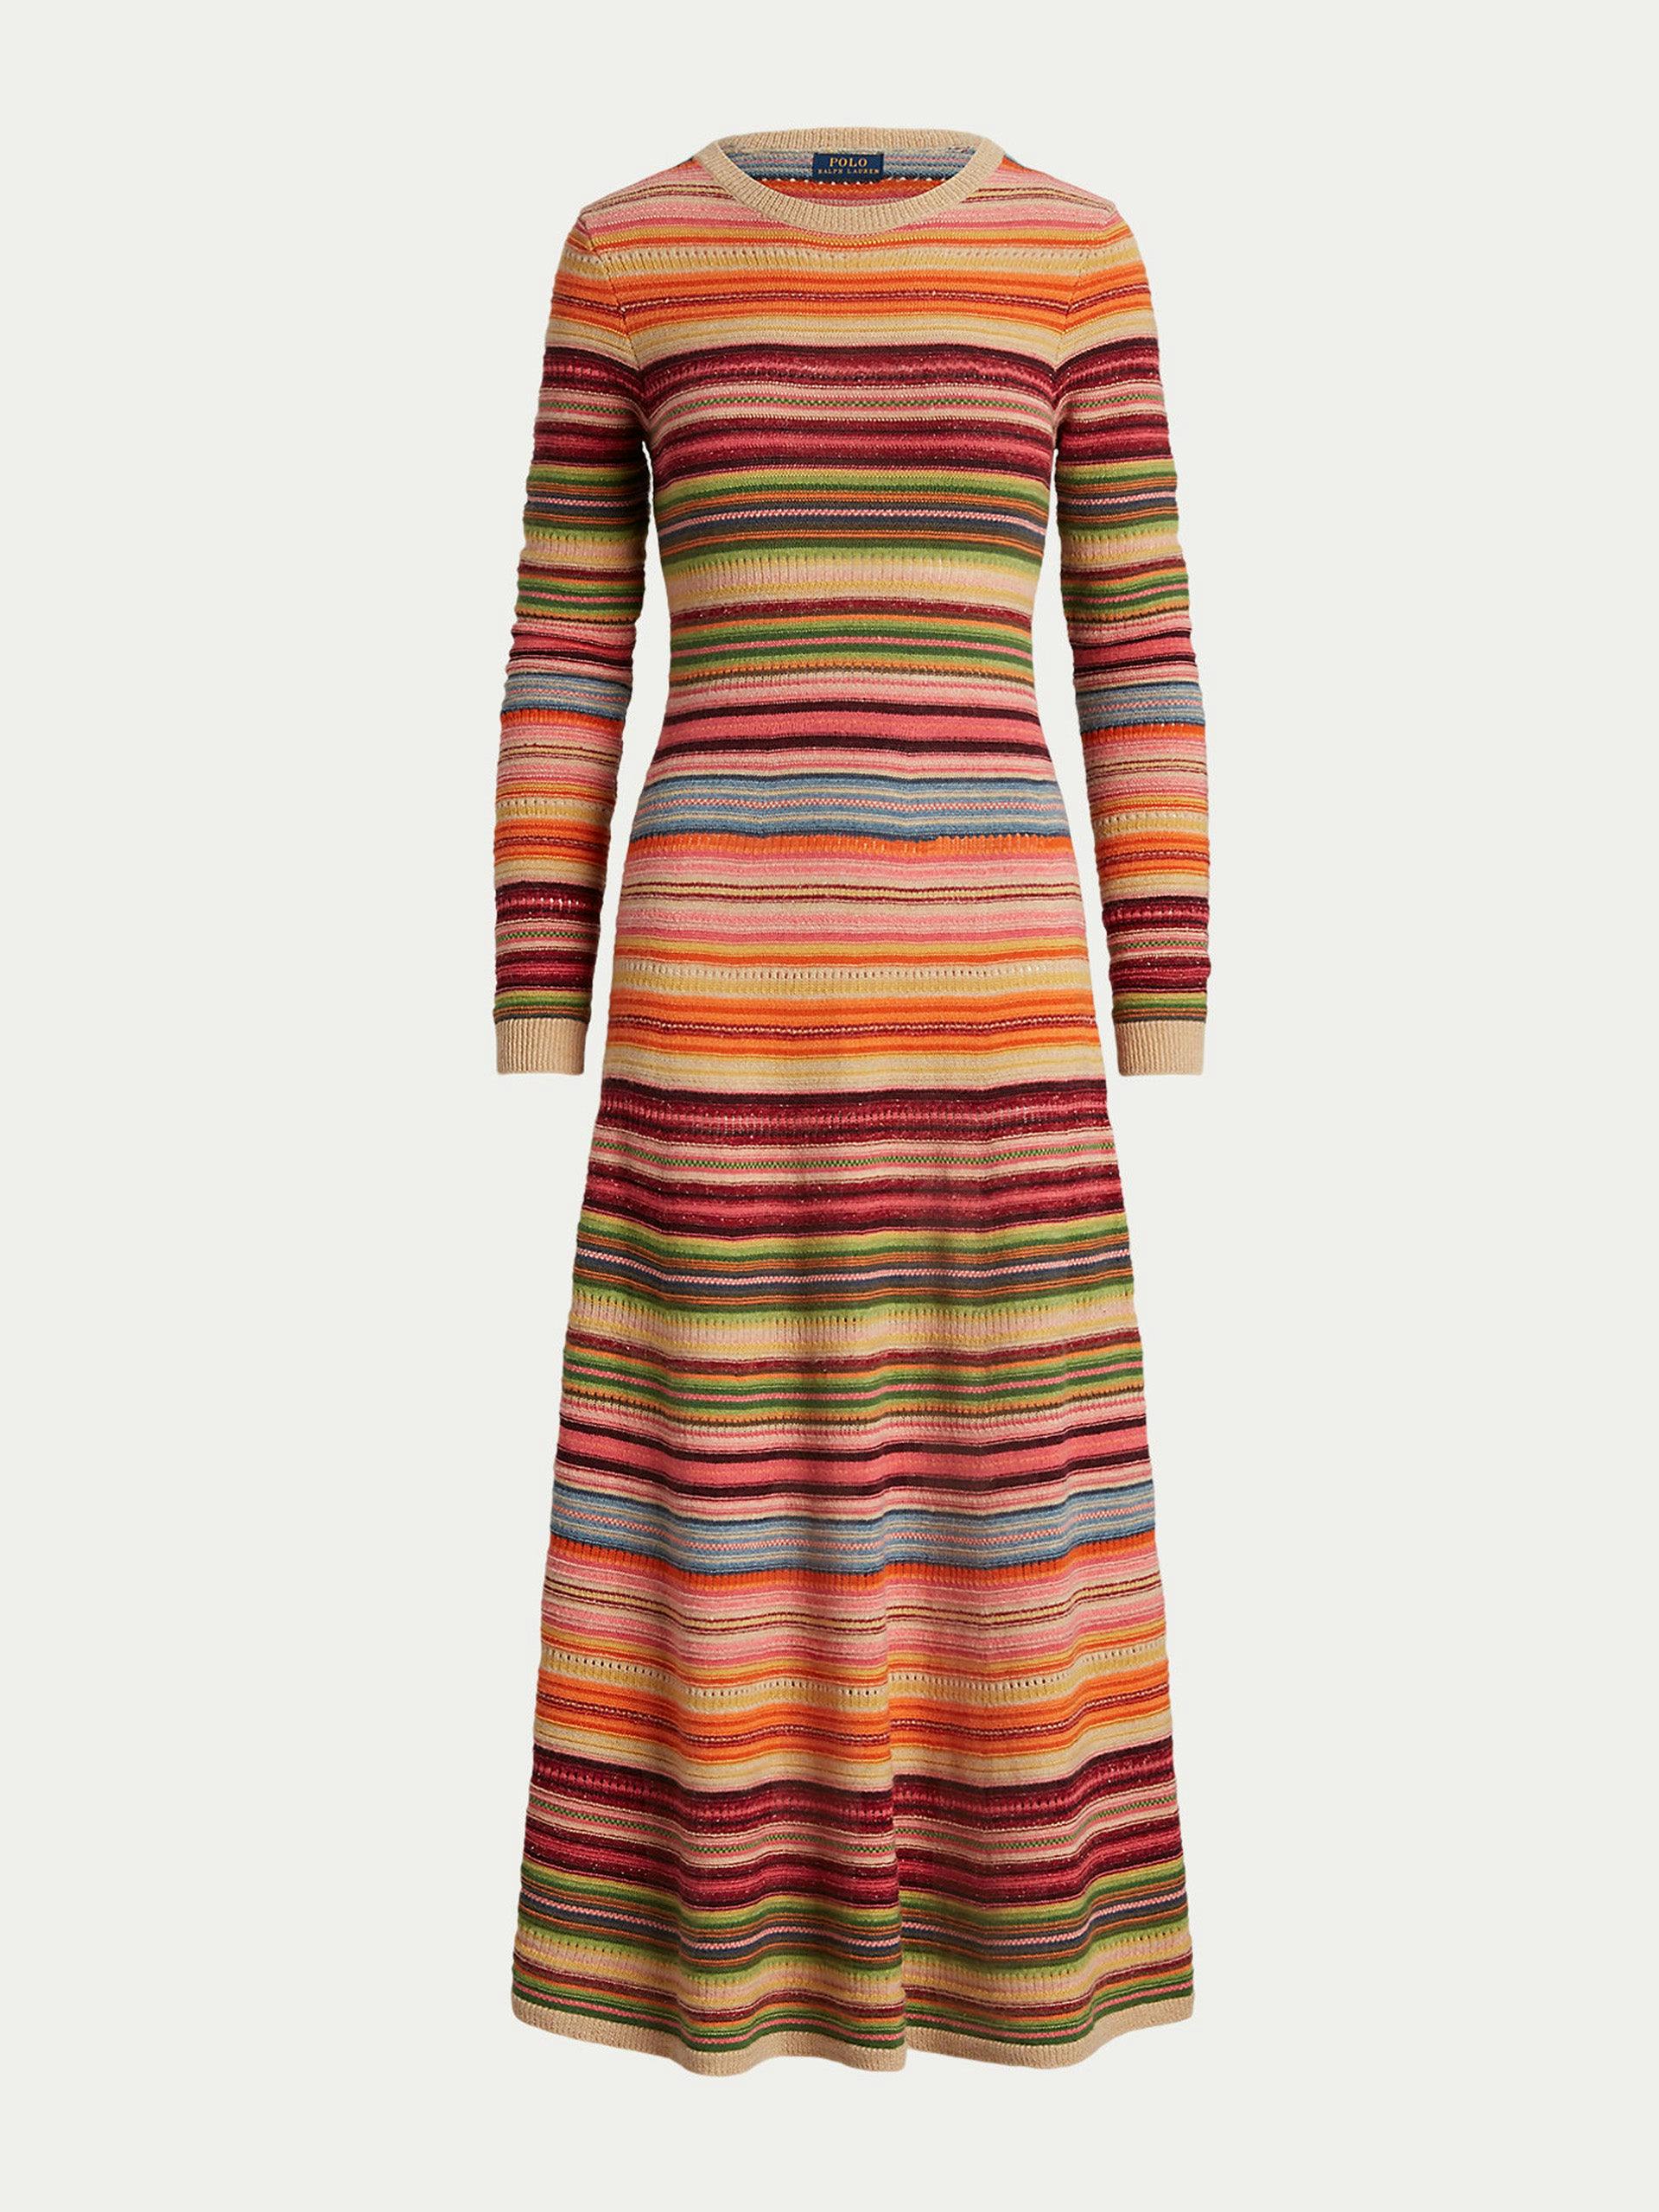 Multicoloured striped knitted dress